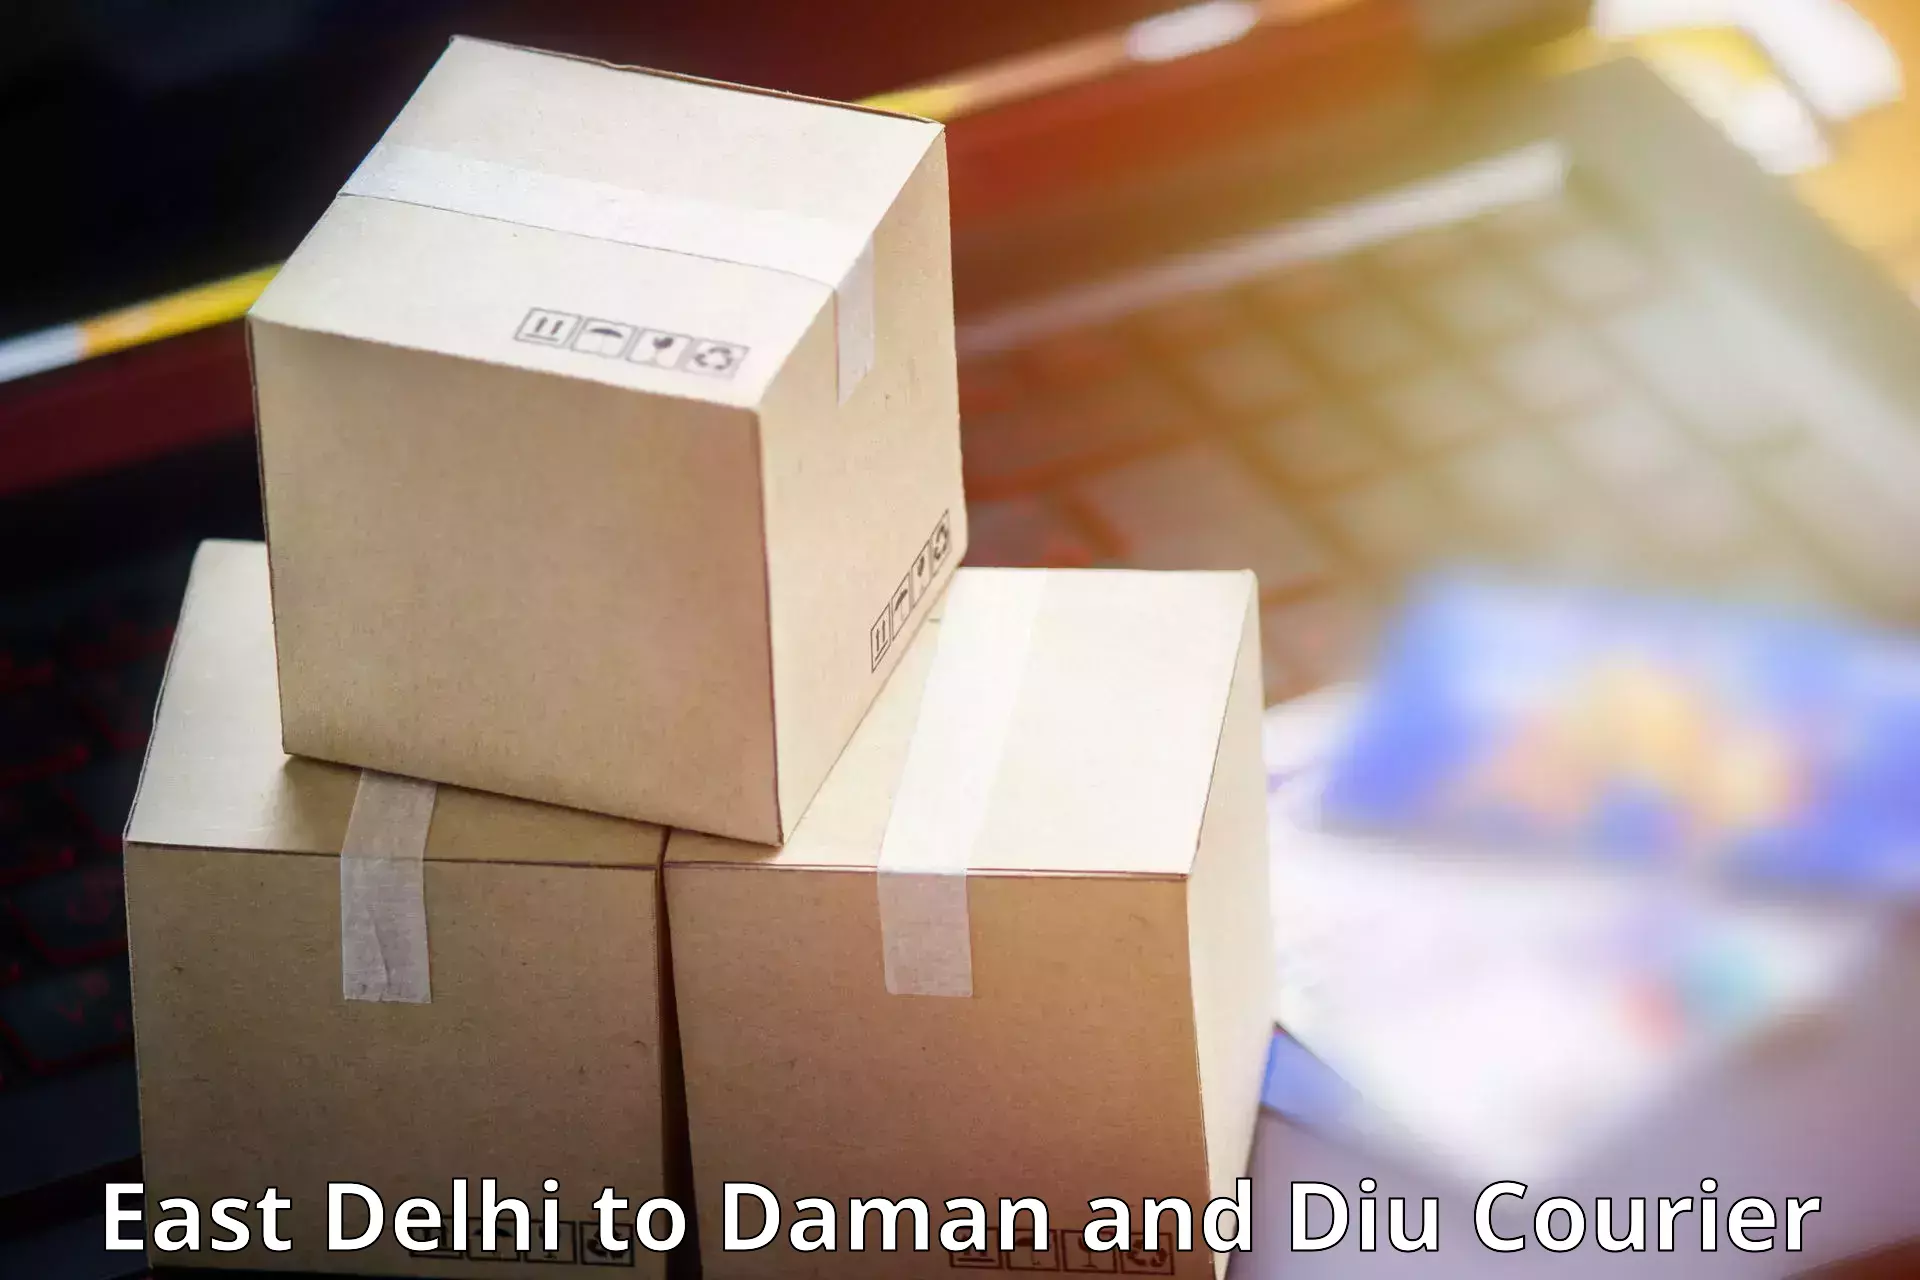 Courier dispatch services East Delhi to Daman and Diu